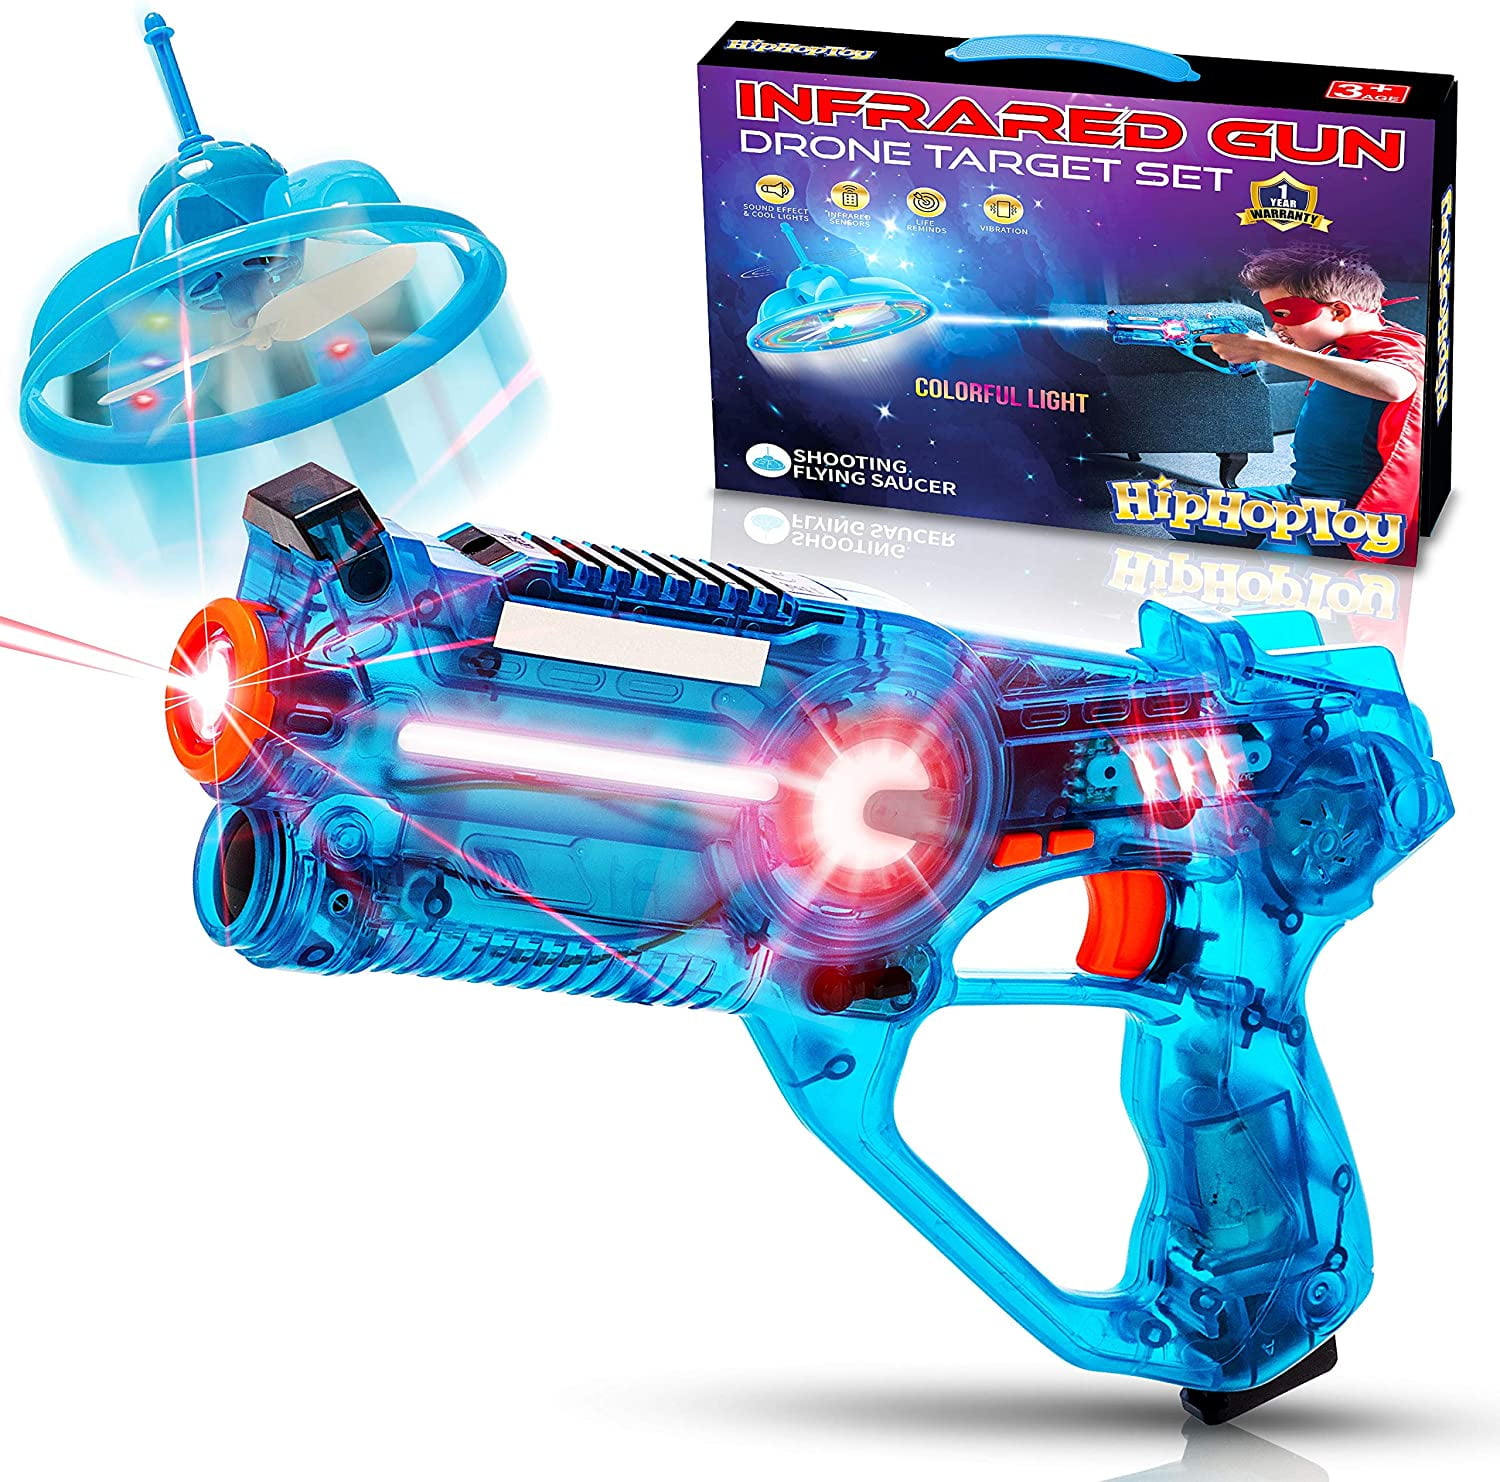 HIPHOPTOY Kids Laser Tag Gun Game with Flying Toy Drone Target, Infrared Lazer Shooting Game for Children with Fun LED Effects, Sounds, and 4 Gun Modes, Best Gift for Boys Ages 5